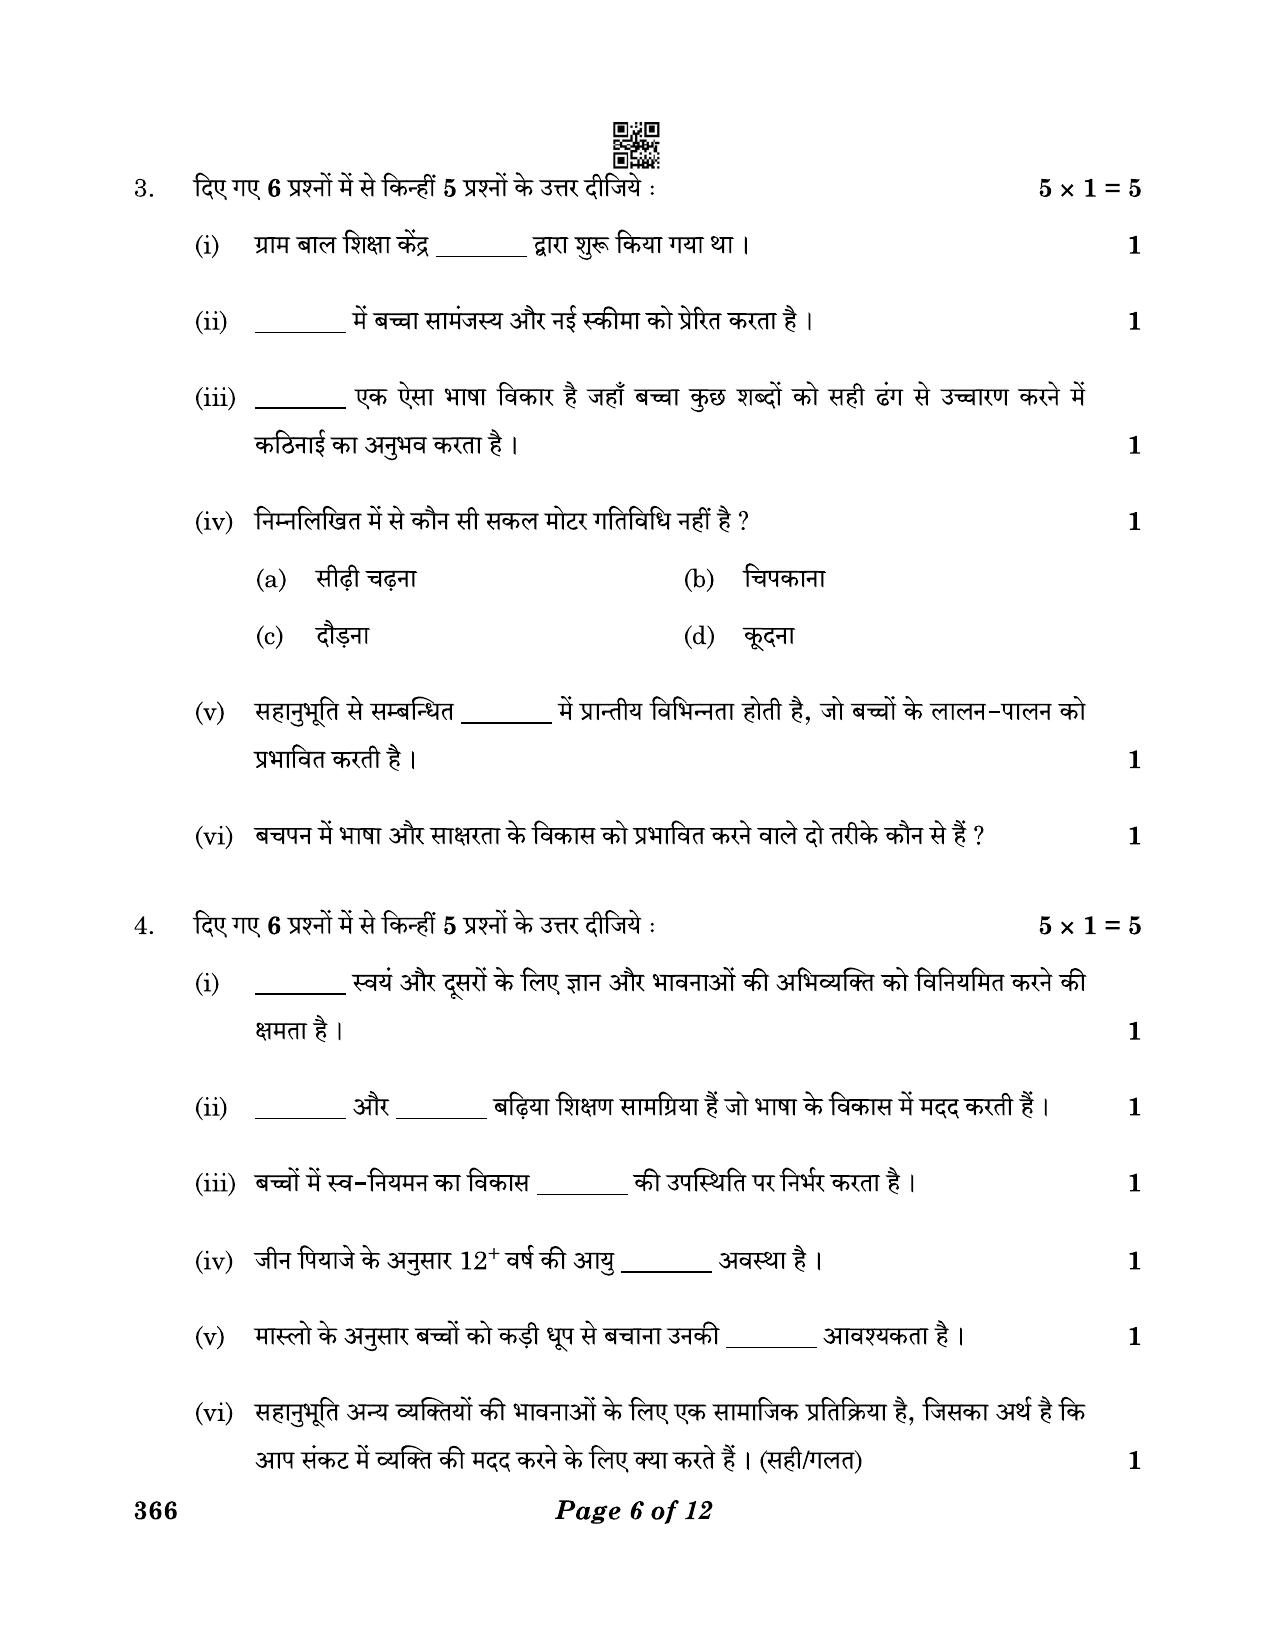 CBSE Class 12 366_Early Childhood Care & Education 2023 Question Paper - Page 6